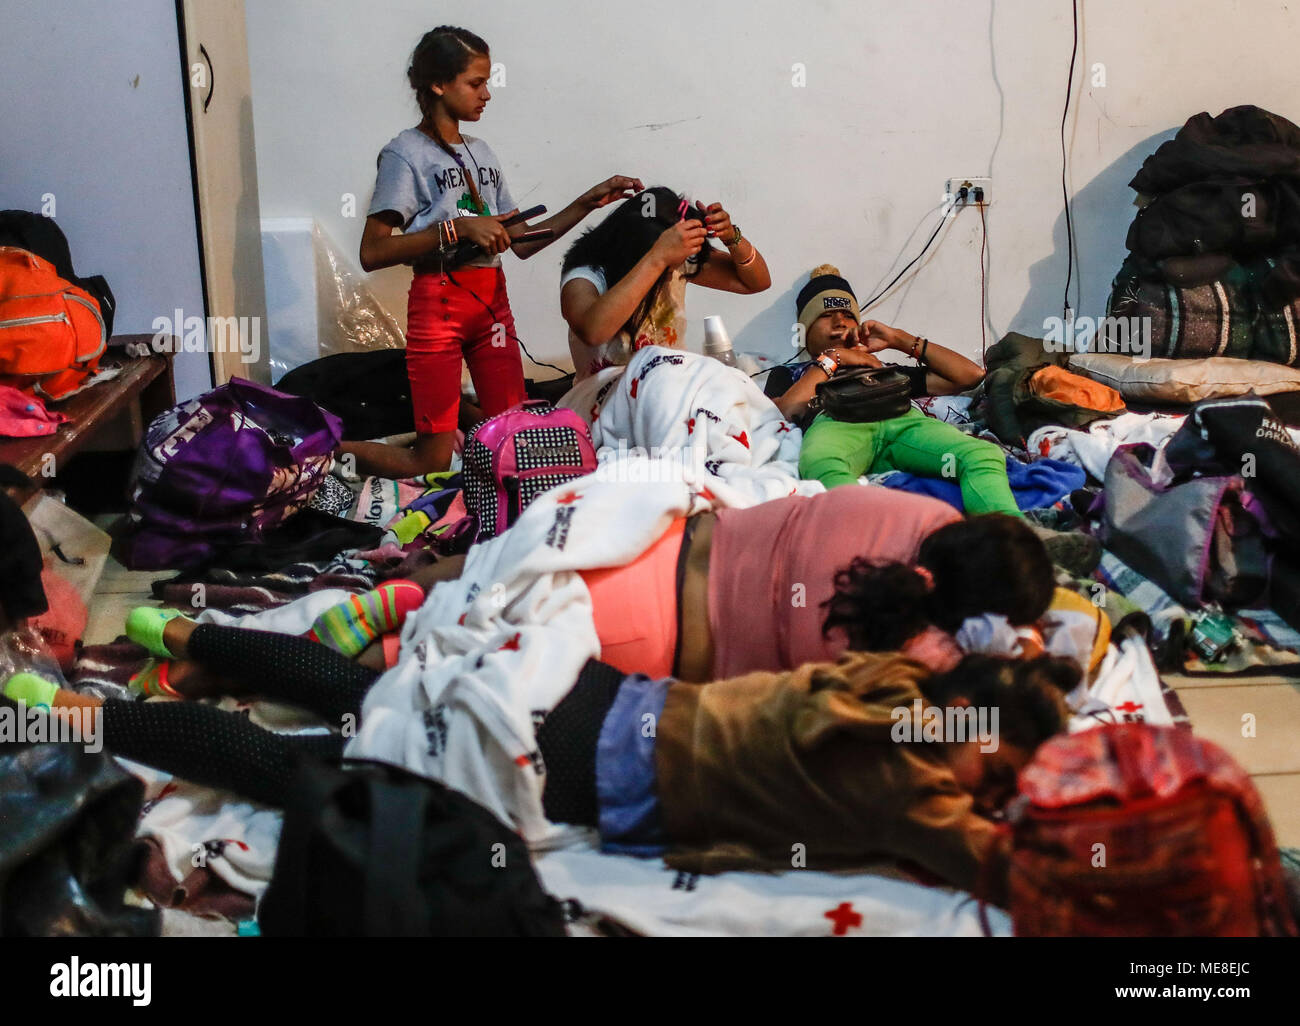 Sonara, Mexico, 21 April 2018. The Caravan of Migrants receive medical attention, food, personal hygiene and a place to rest in the community dining room of Colonia San Luis de Hermosillo, Sonora Mexico. Around 600 people, mostly of Central American origin, come from the southern border of the country and bound for the city of Tijuana. The caravan aims to request Asylum to the United States through a humanitarian visa, La Caravana provoked the wrath of President Donald Trump for this trip to the border with the United States. Credit: NortePhoto.com/Alamy Live News Stock Photo